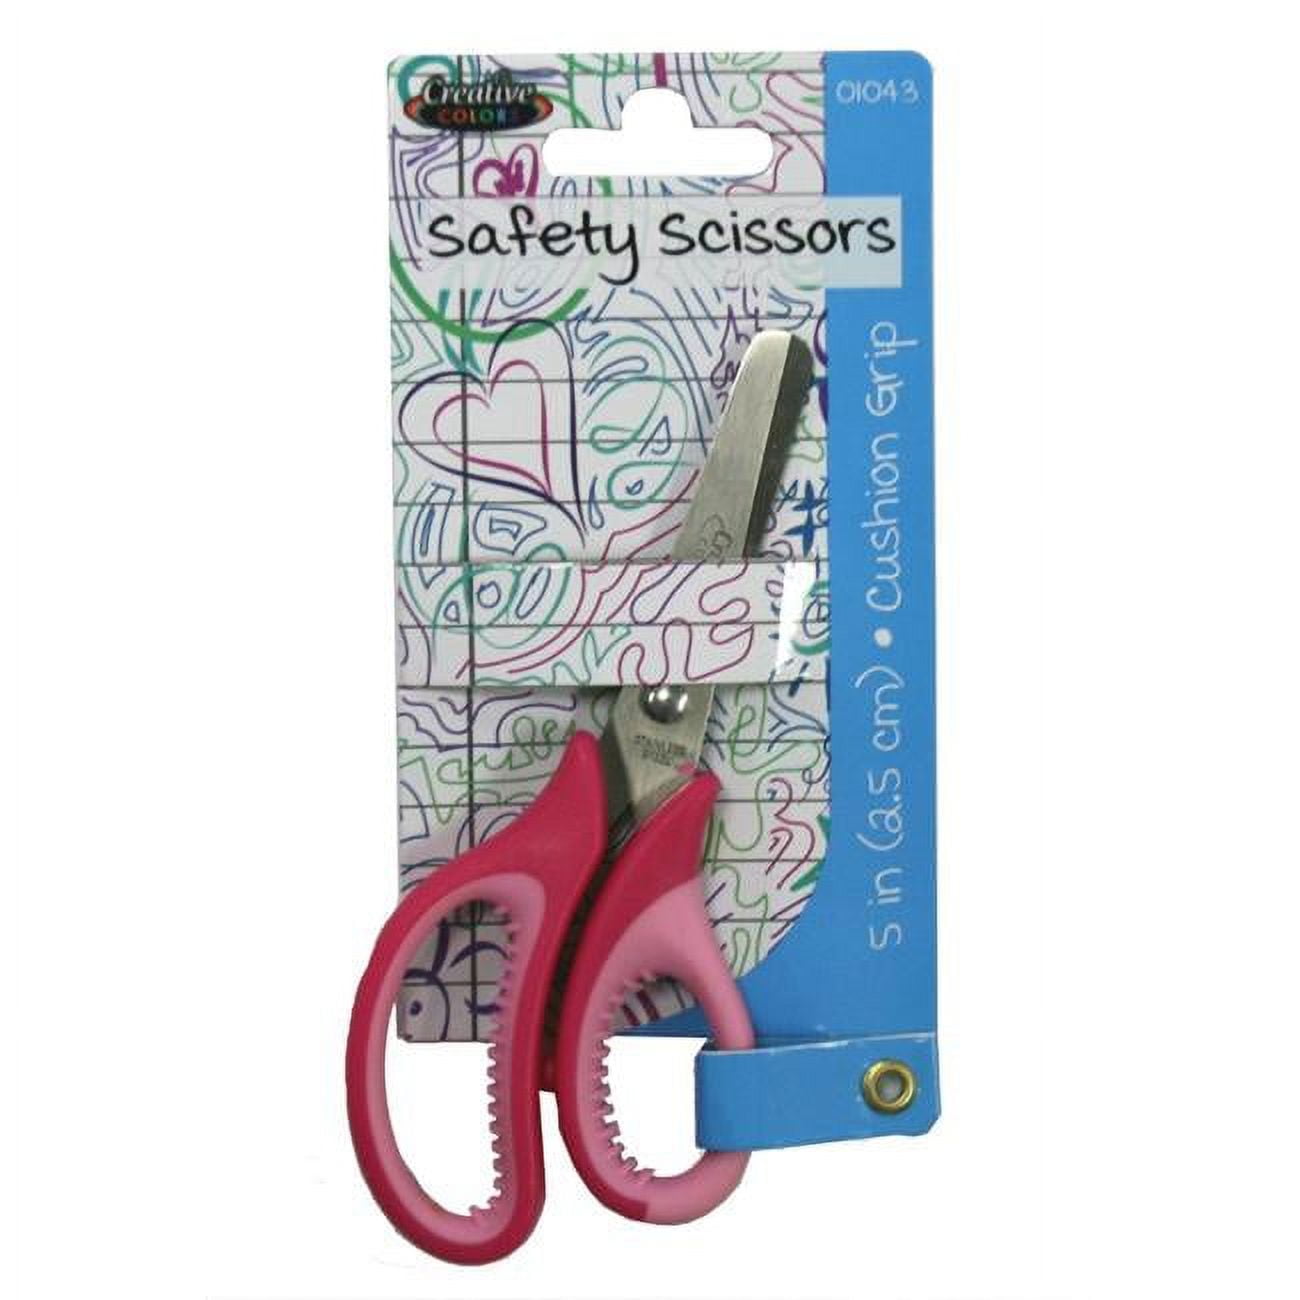 2289552 5 In. Cushion Grip Safety Scissors, Assortedcolor - Case Of 48